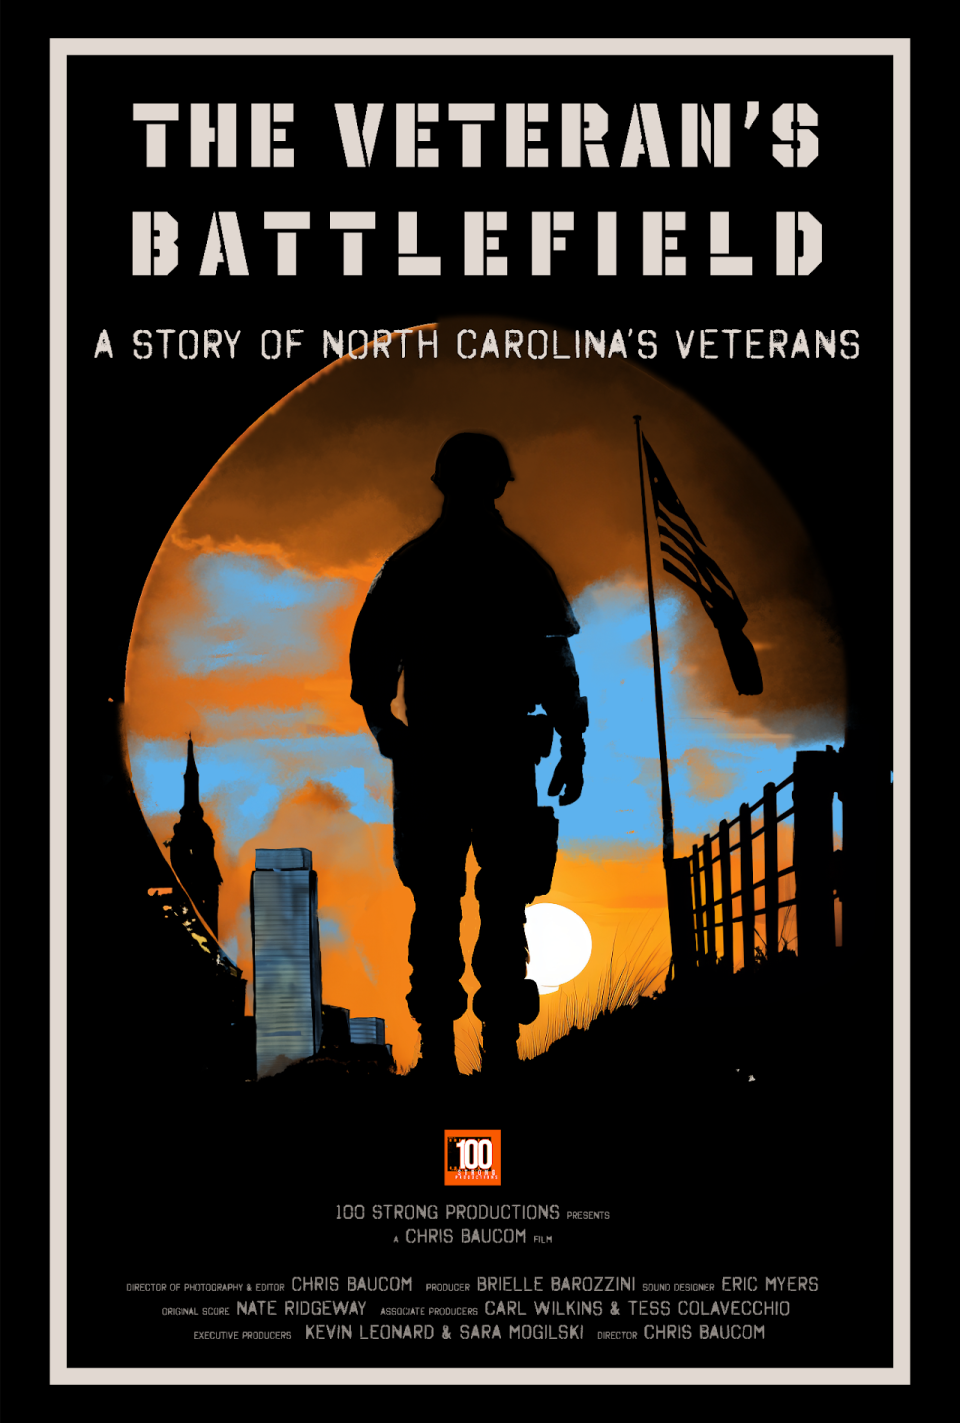 A screening of "Veterans Battlefield" is June 13 at the Gaston County main library in Gastonia. The documentary explores struggles veterans face when they discharge from the military.